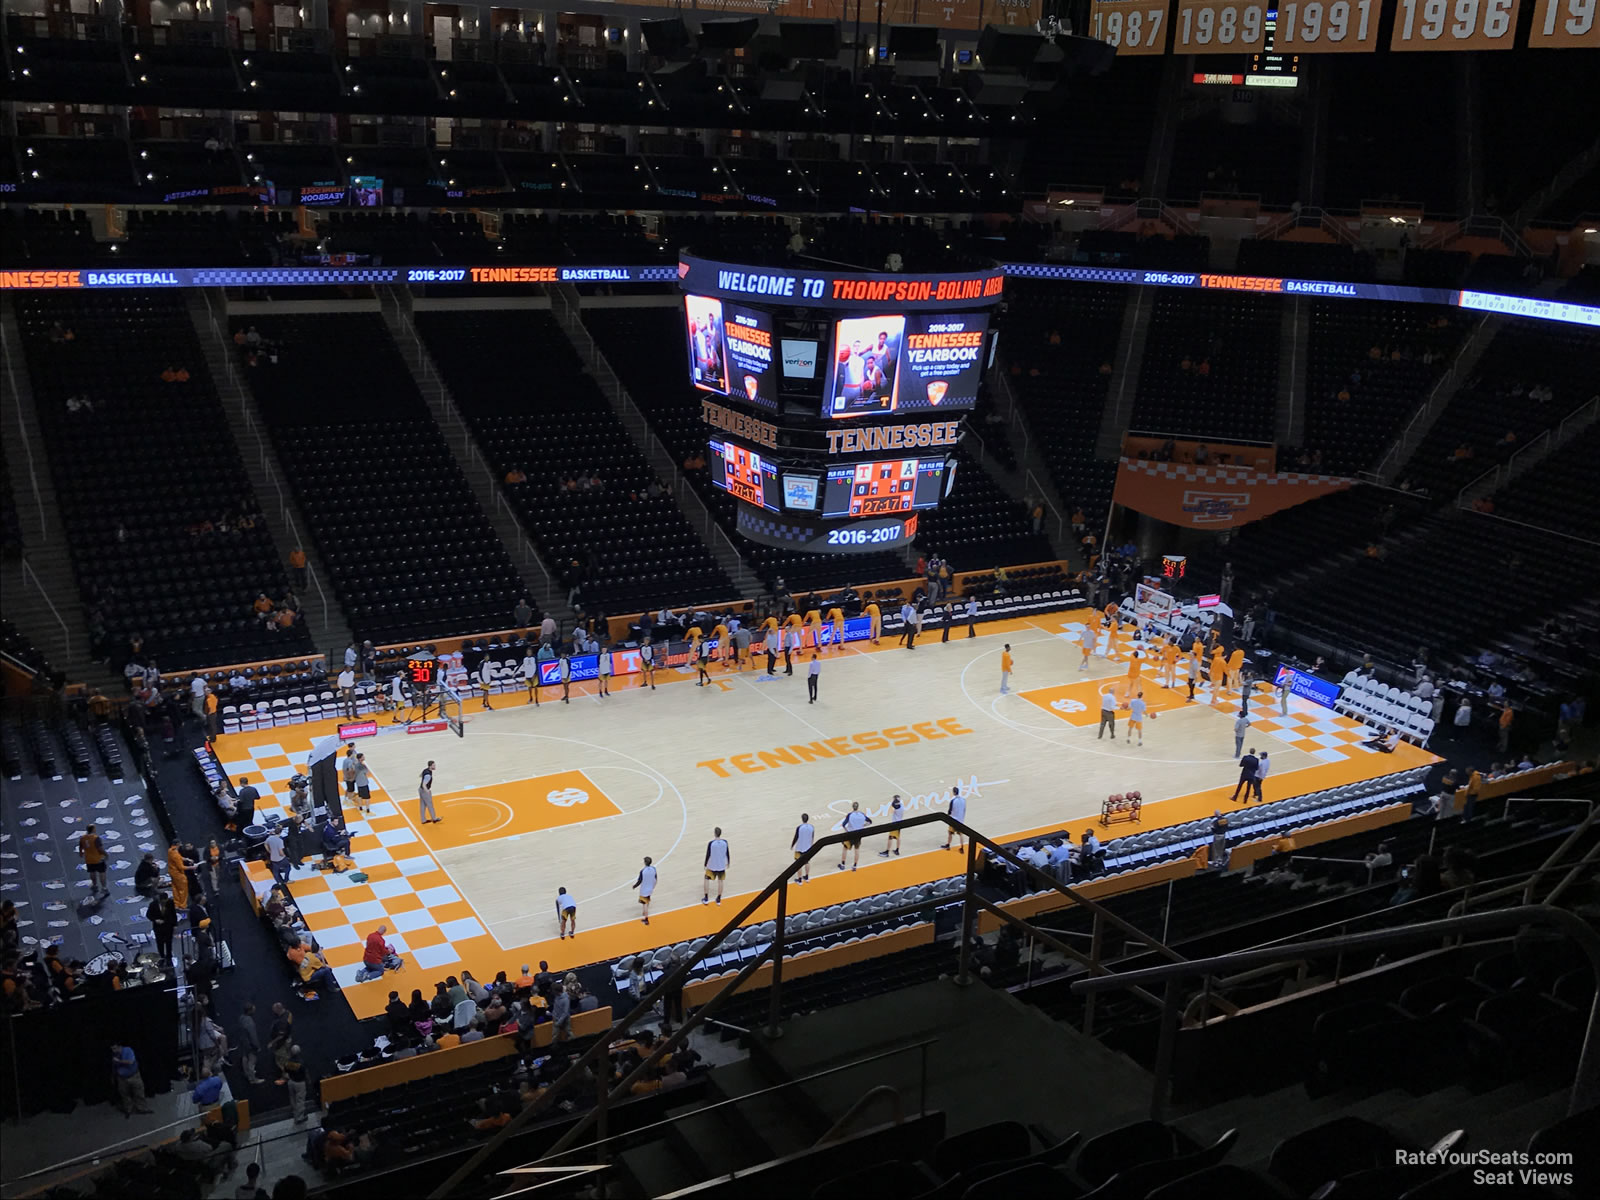 section 324, row 7 seat view  - thompson-boling arena